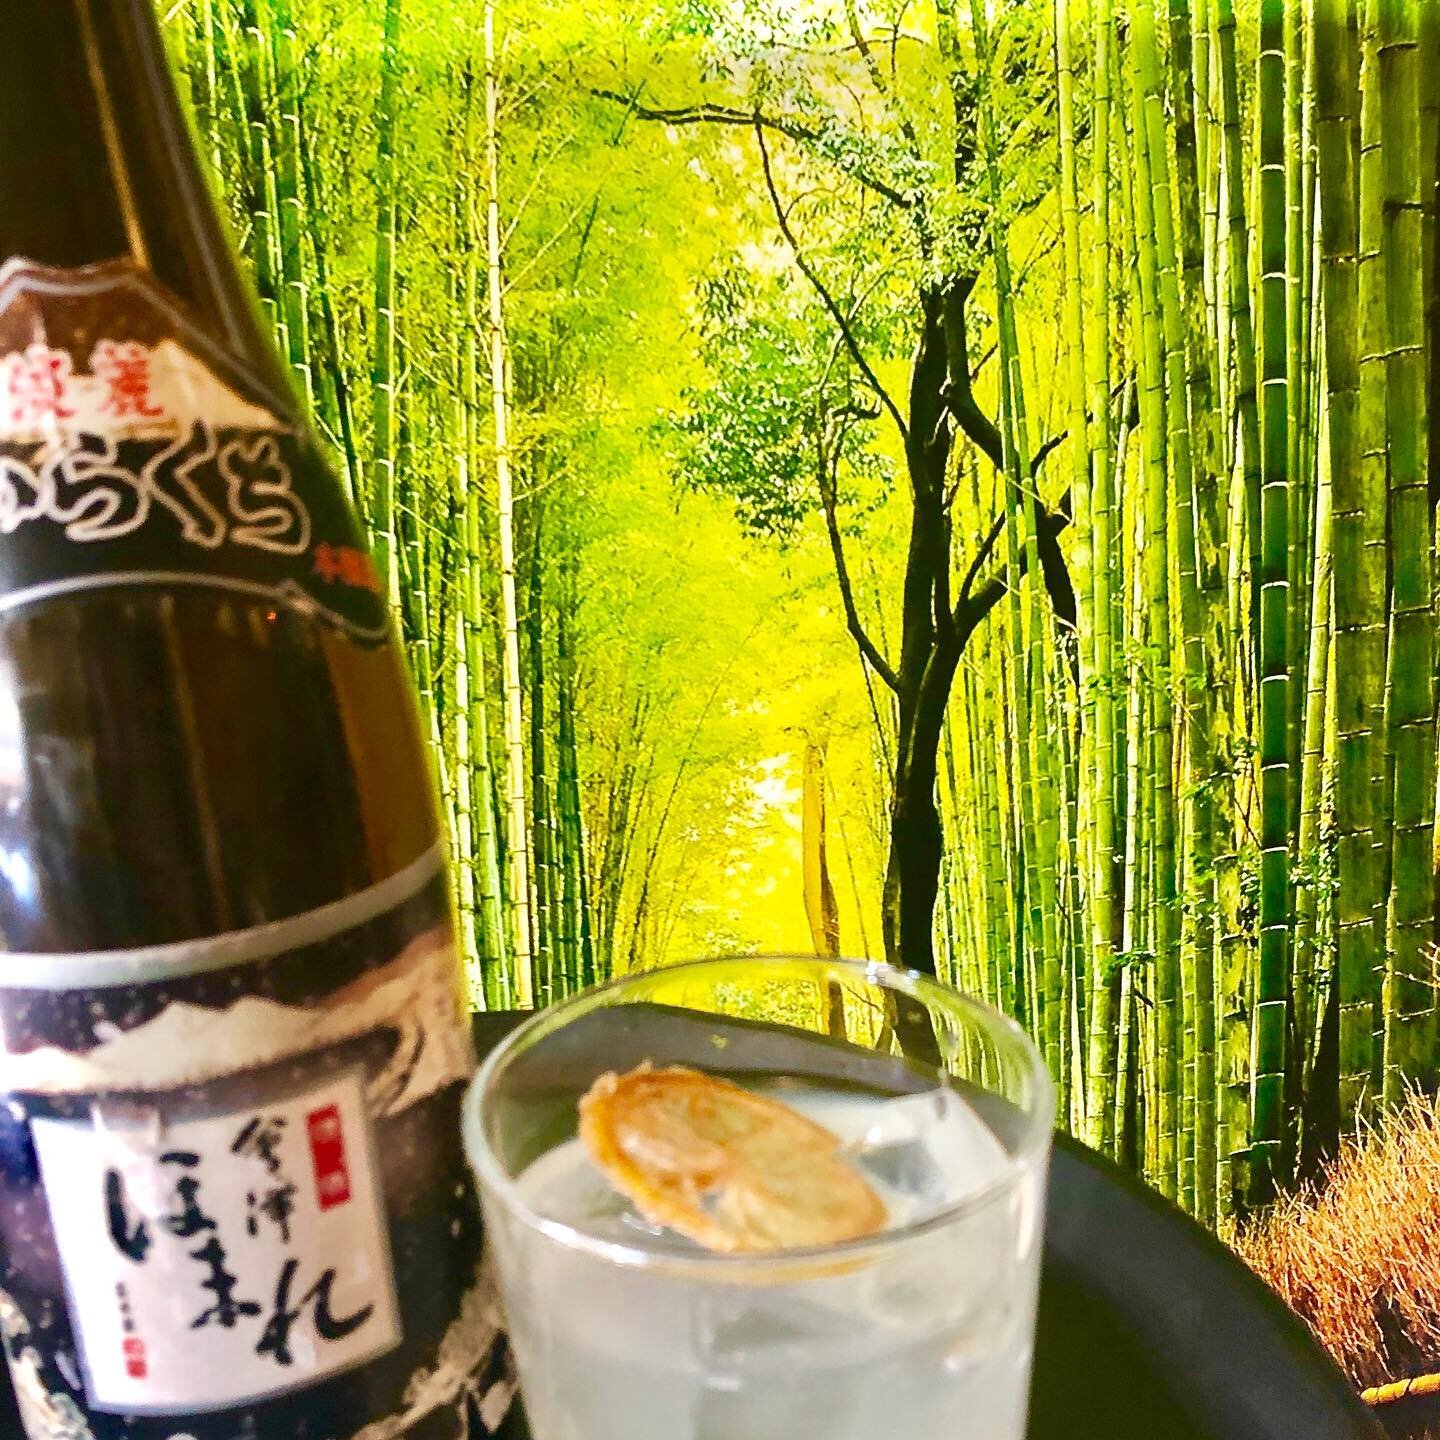 World 🌍 sake day!!!! #kampai with our famous sakaid cocktail!! Join us #supportsmallbusiness #supportlocal